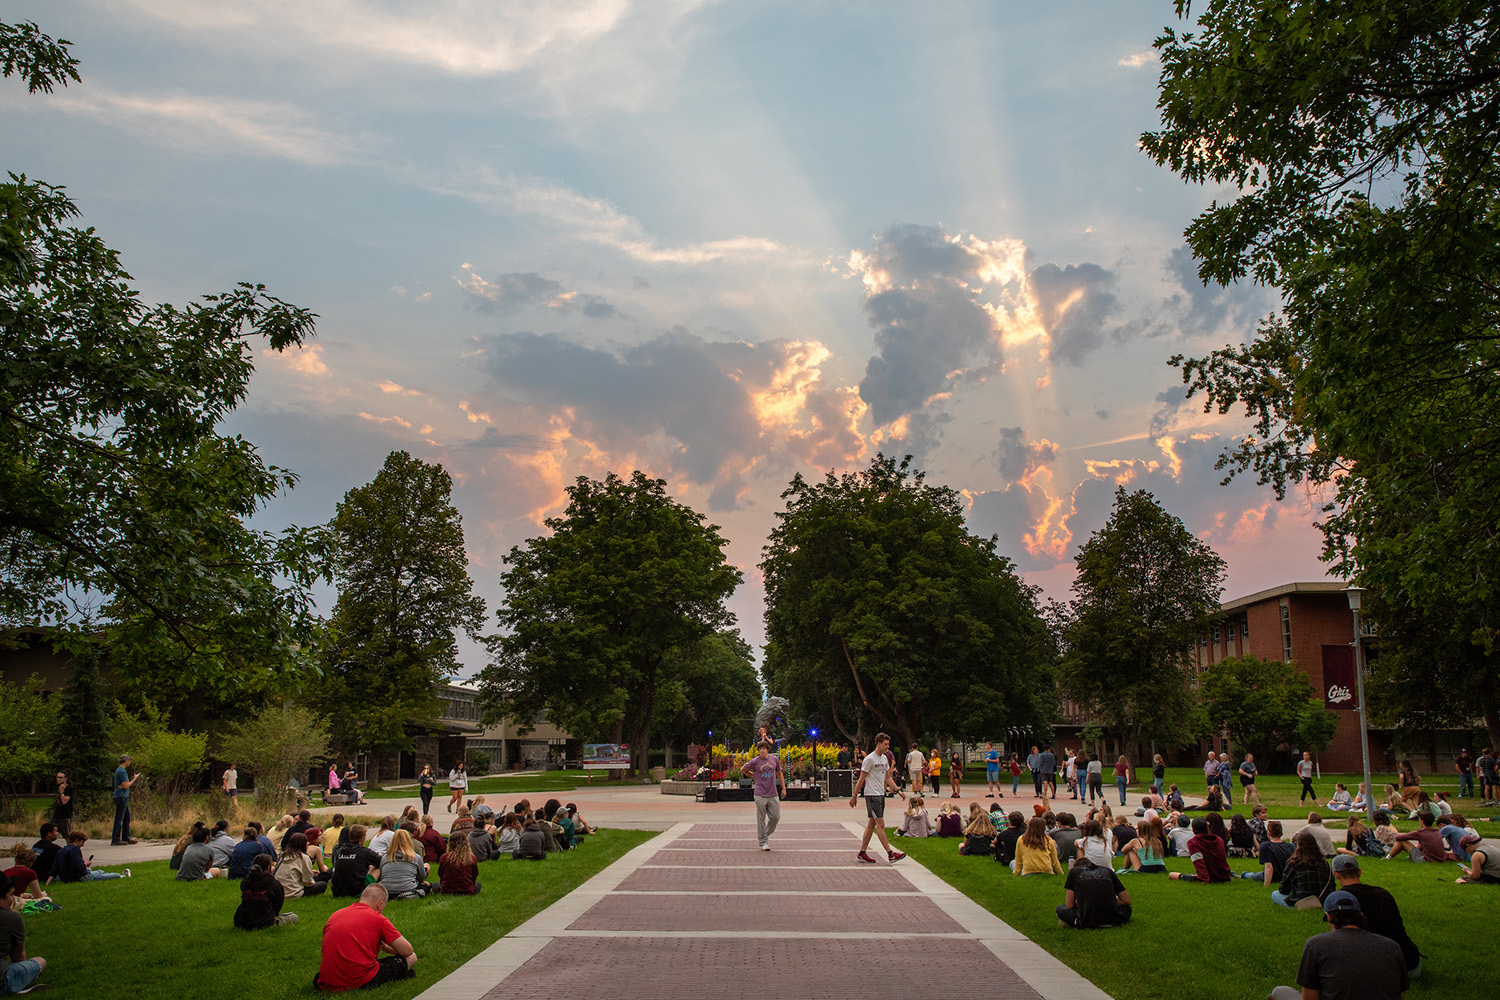 Student gather on the Oval for an event at the sunset illuminates the sky.